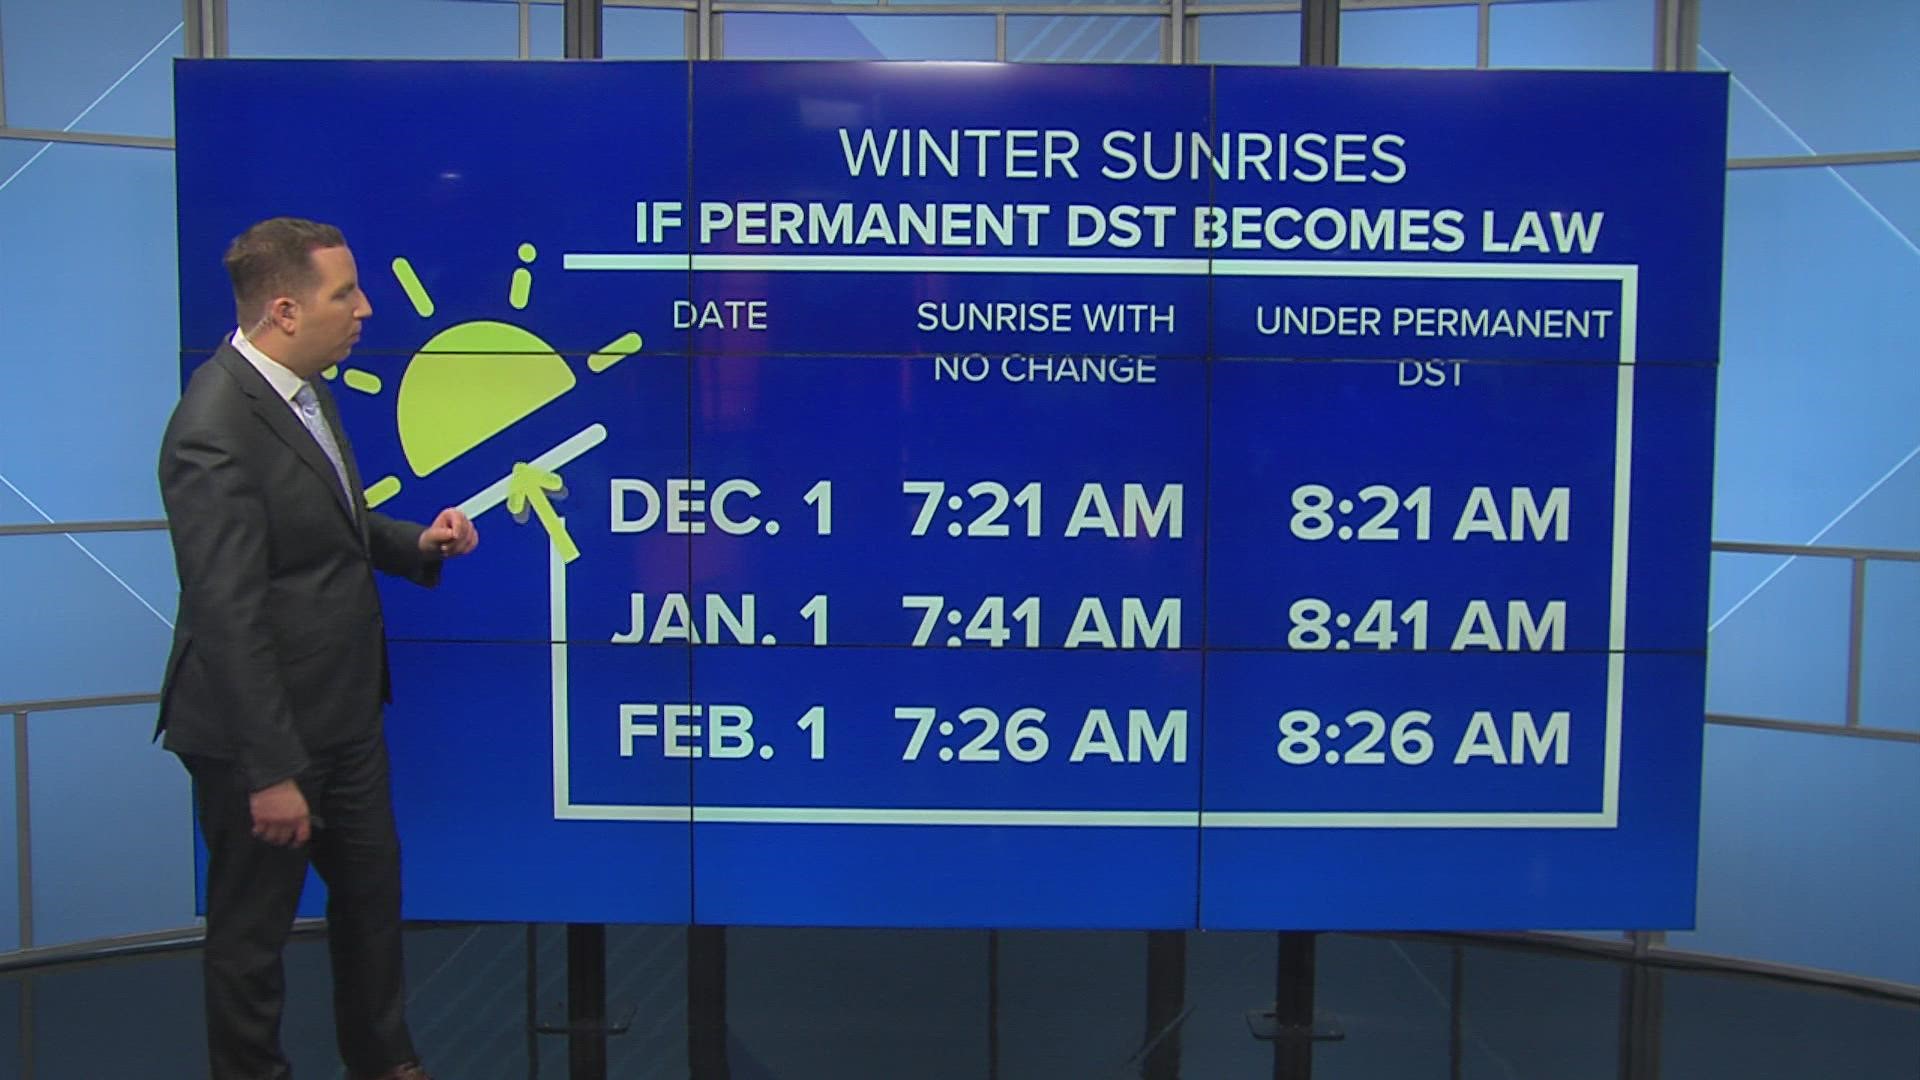 Although a switch to permanent Daylight Saving Time would mean later sunsets in the winter, it would also bring later sunrises.